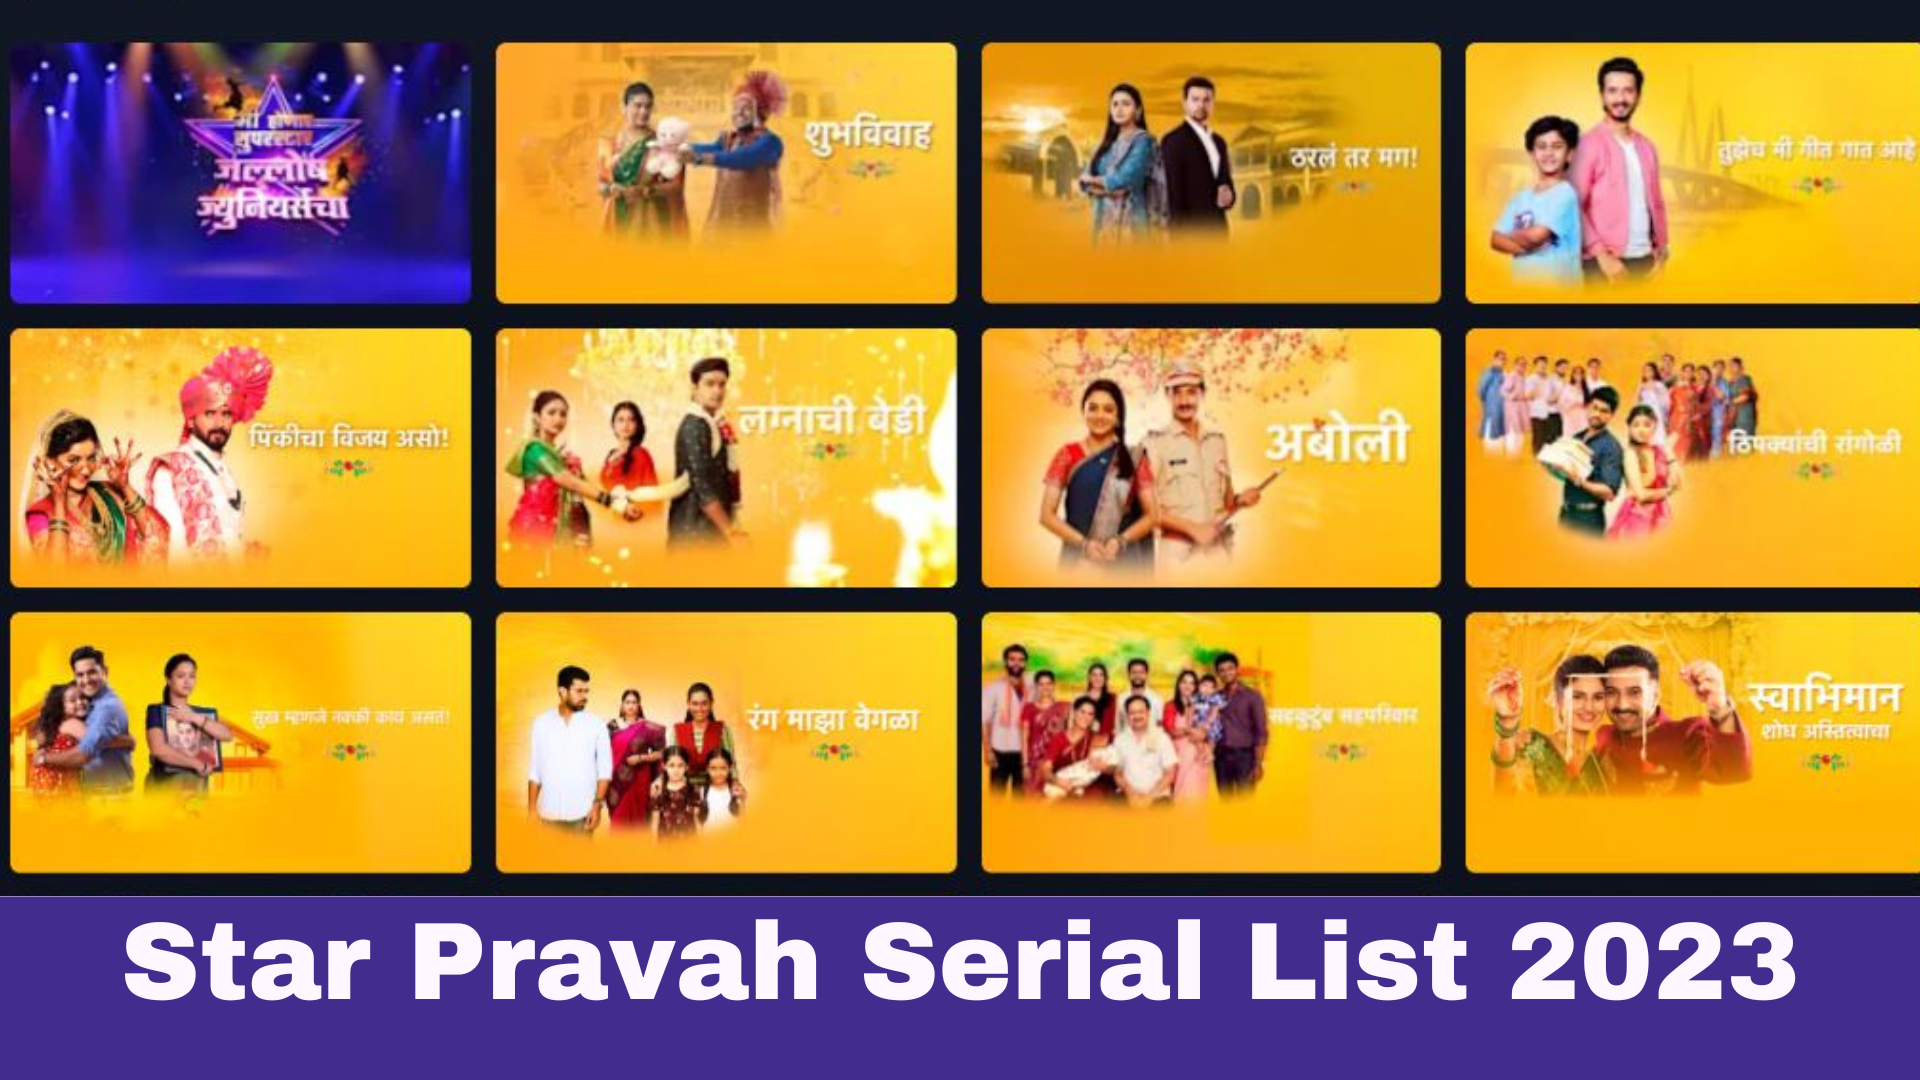 Star Pravah Serial List 2023 Timing, Schedule, And More